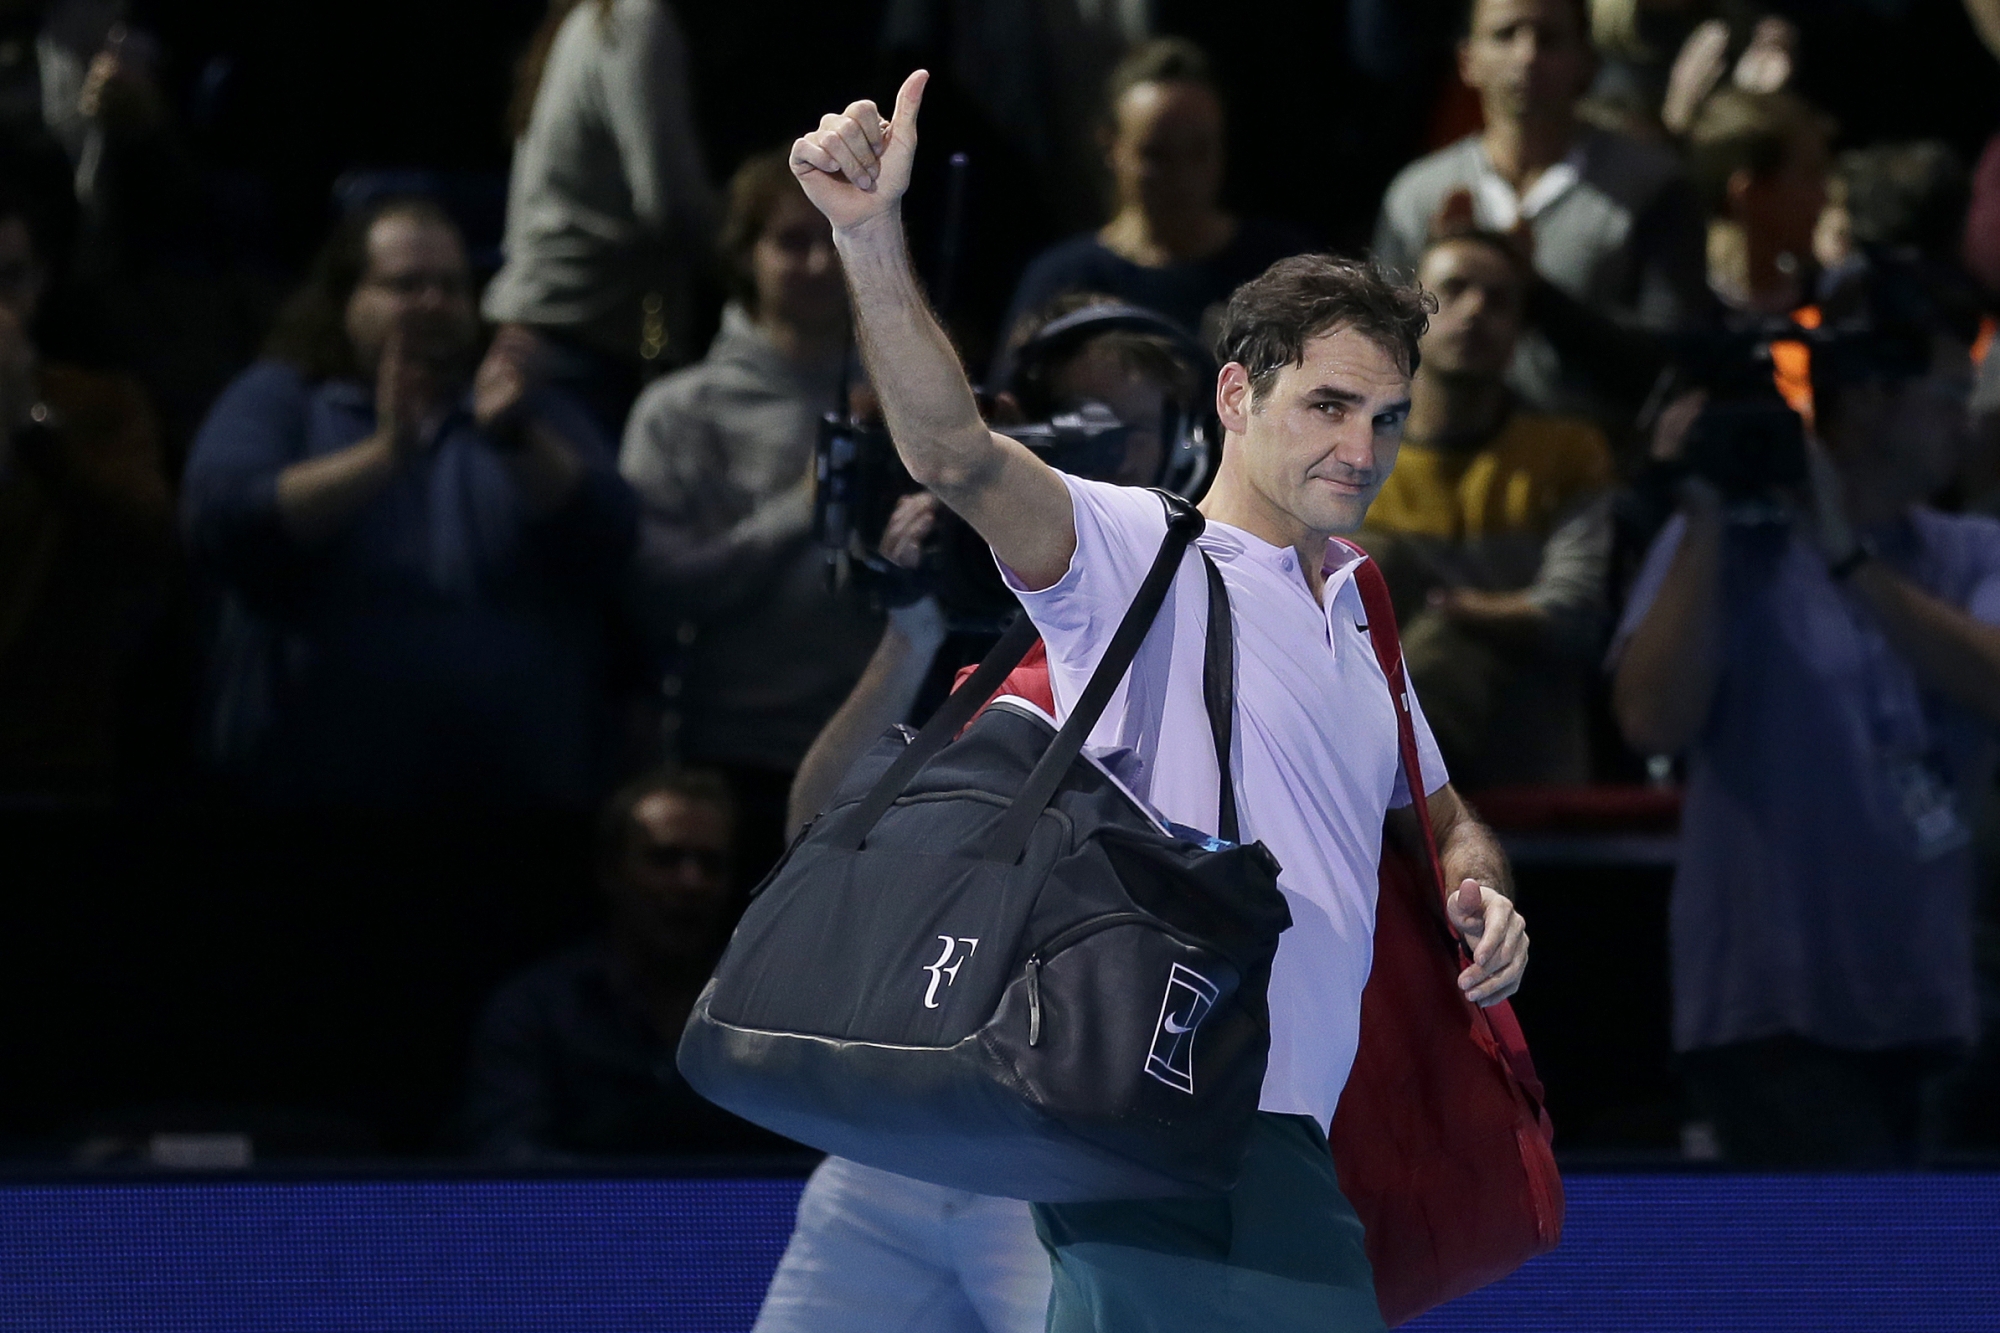 Roger Federer of Switzerland walks off the court after losing to David Goffin of Belgium in their ATP World Tour Finals semifinal tennis match at the O2 Arena in London, Saturday Nov. 18, 2017. (AP Photo/Tim Ireland)